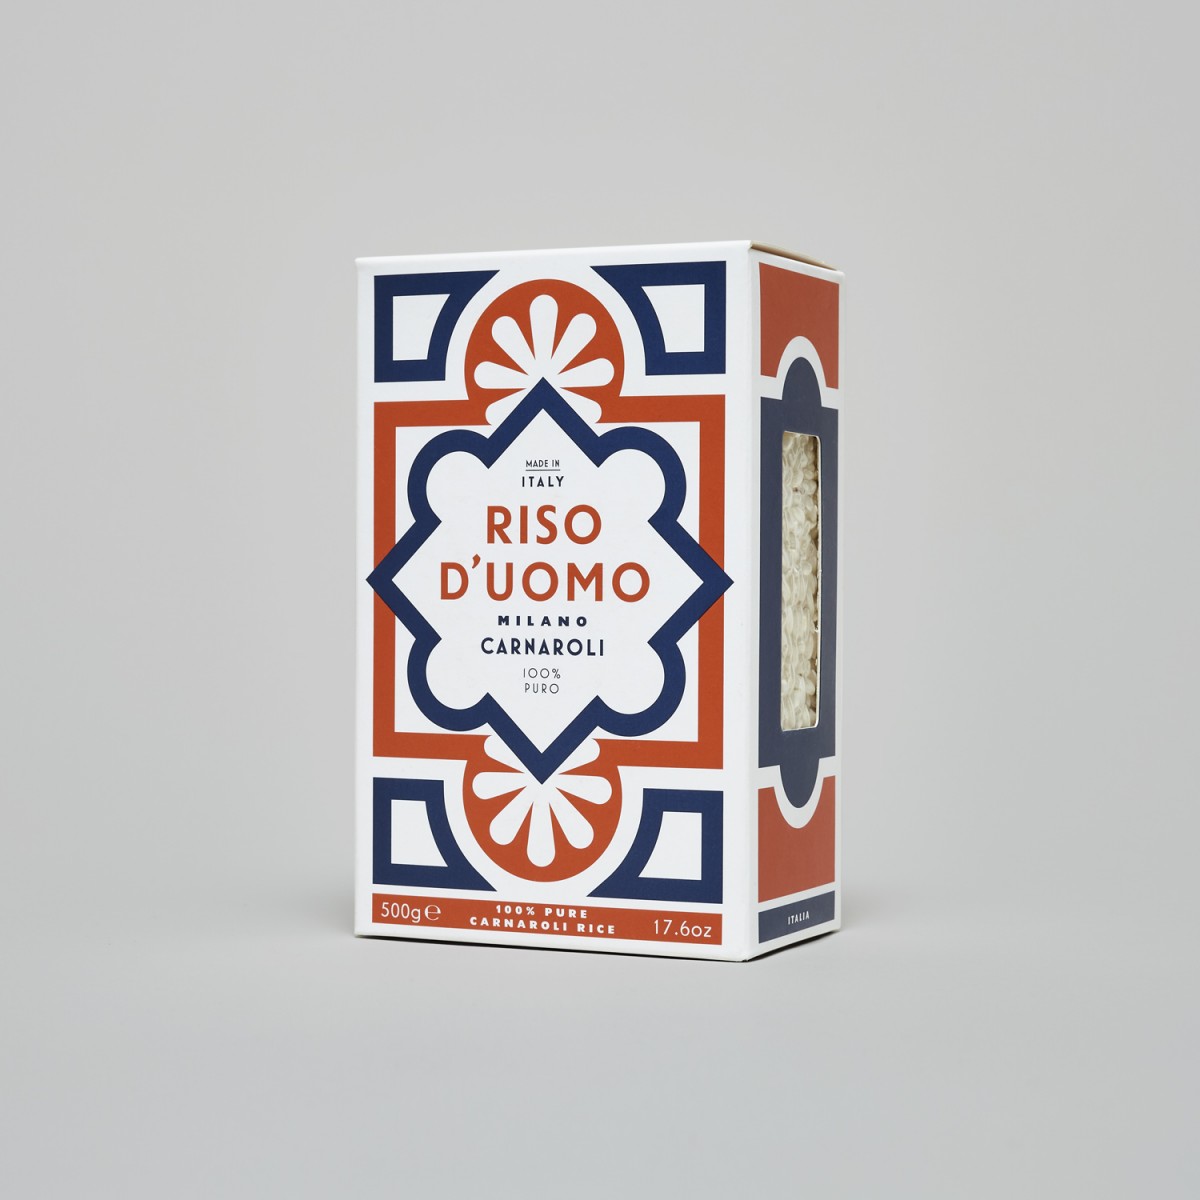 Branding and packaging by London-based Here Design for Milanese artisan rice brand Riso D'uomo